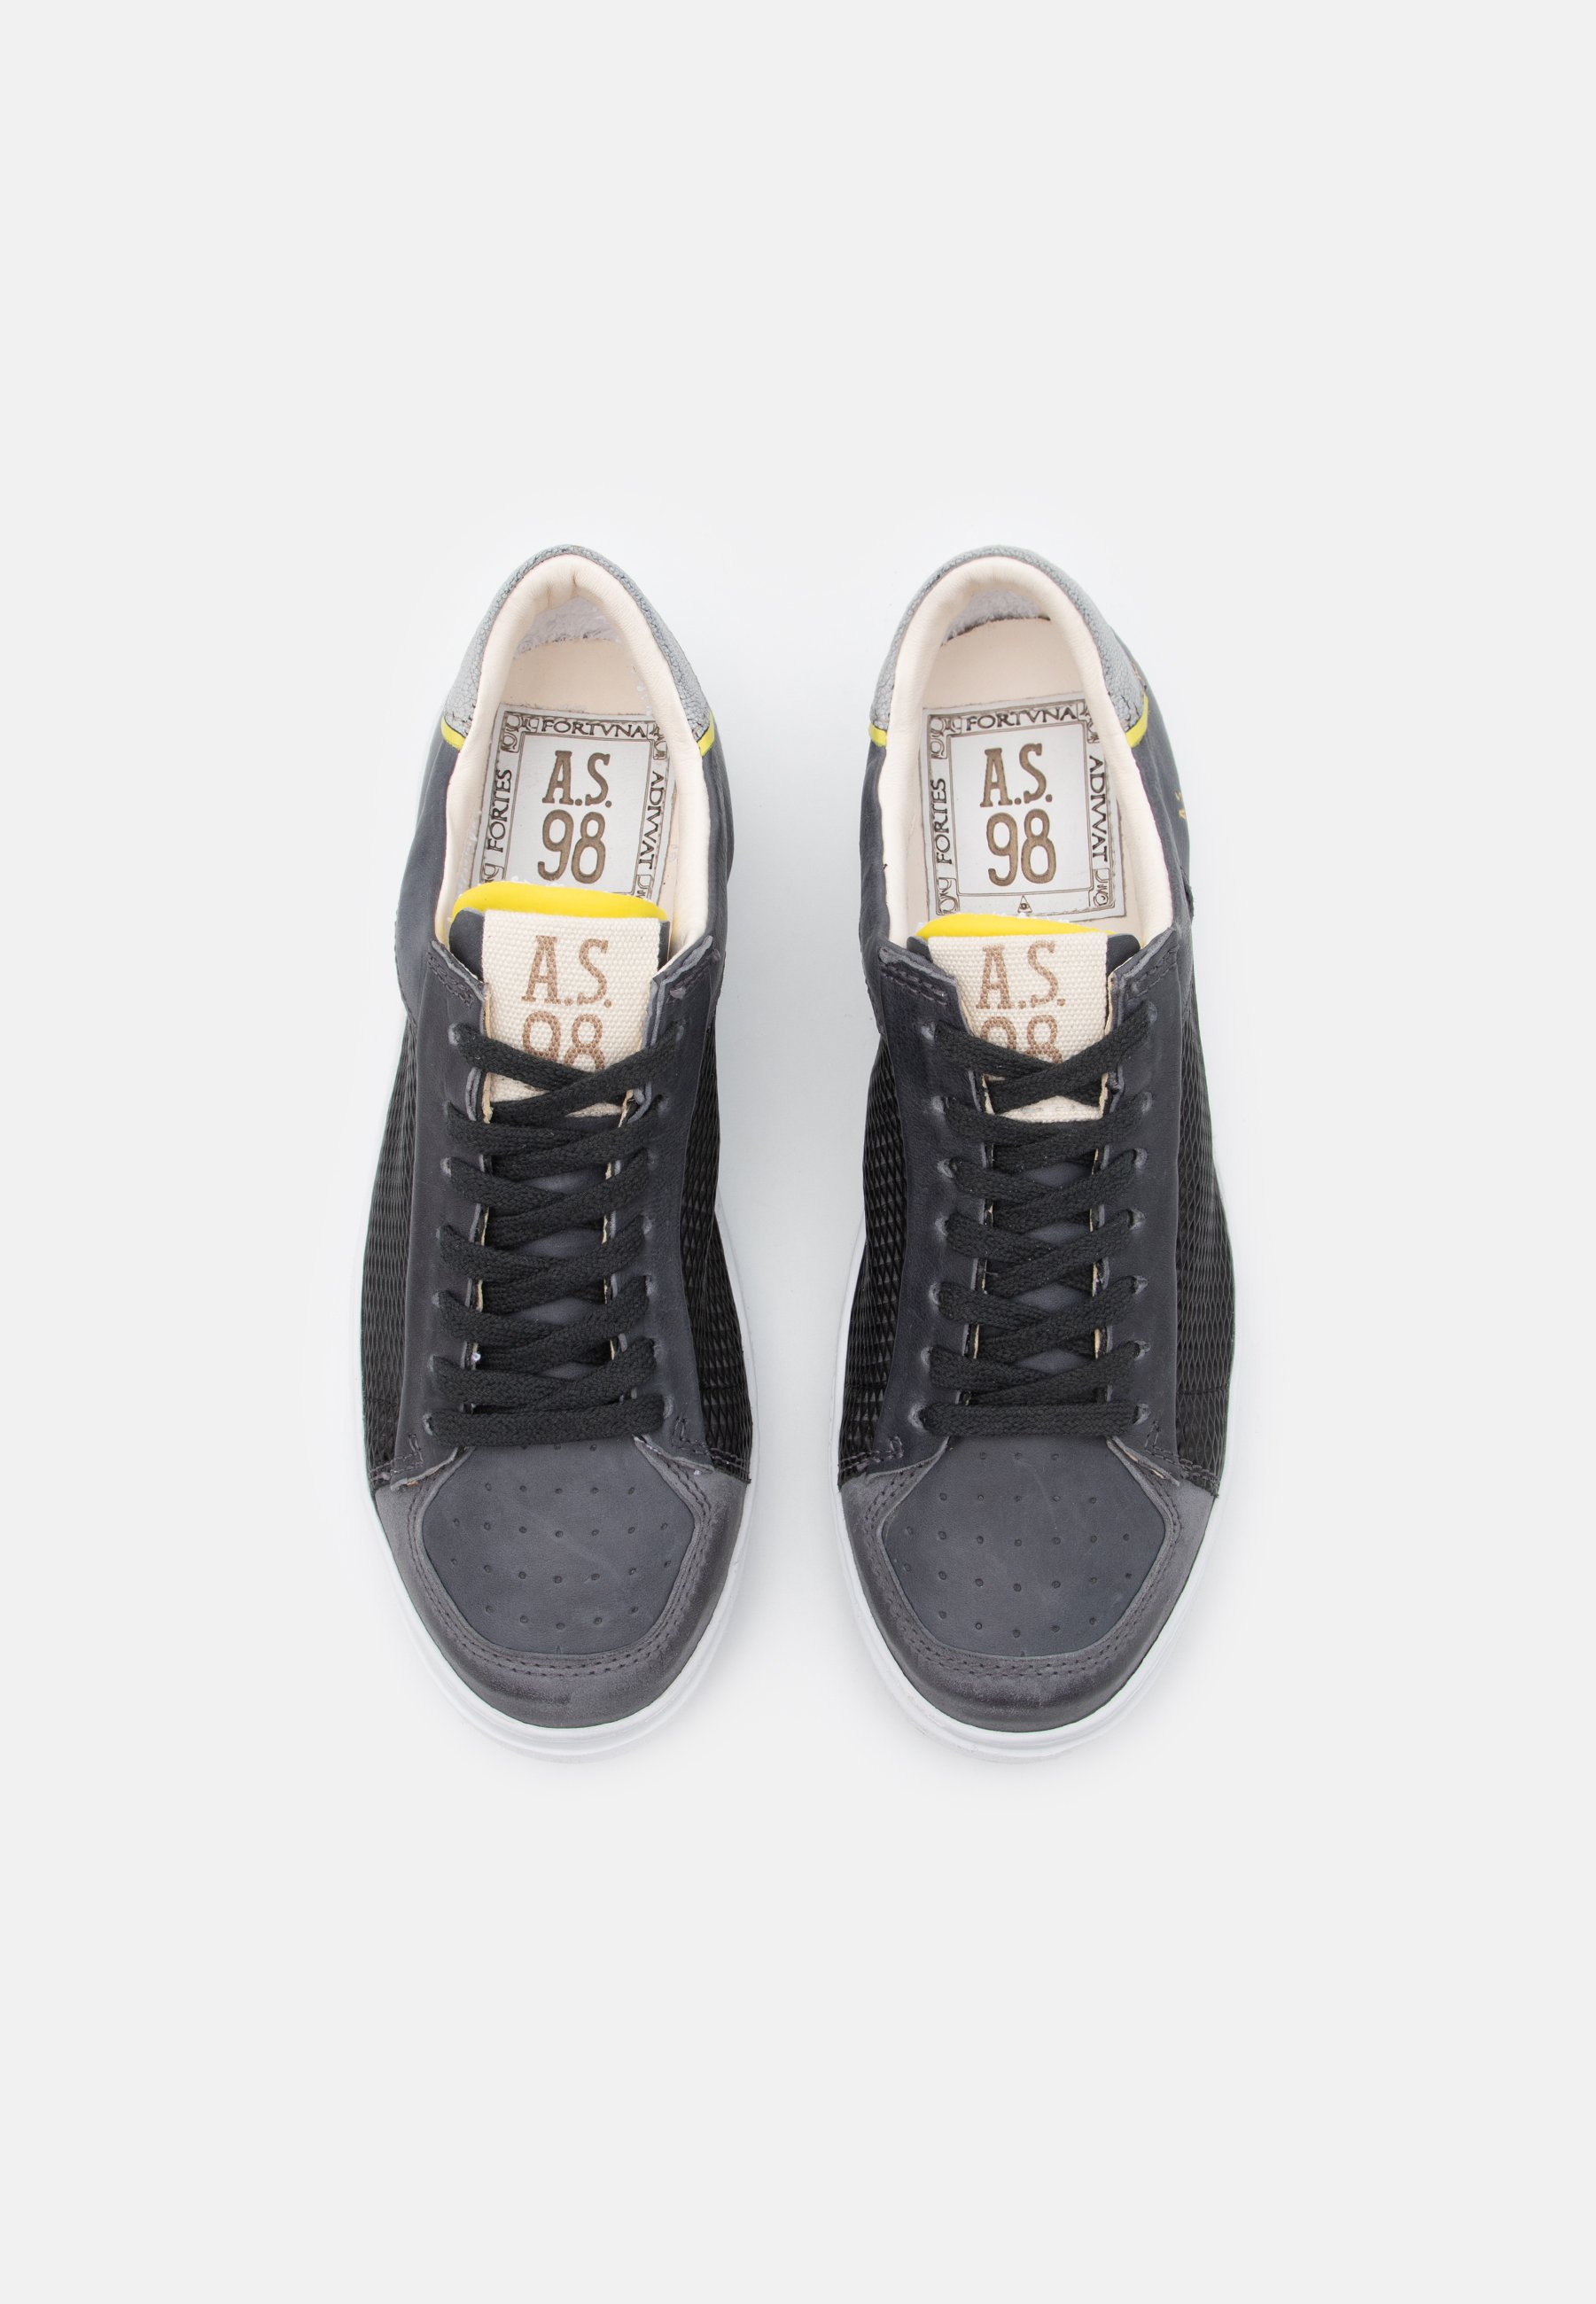 A.S. 98 Leather Fortuna Indigo Sneakers